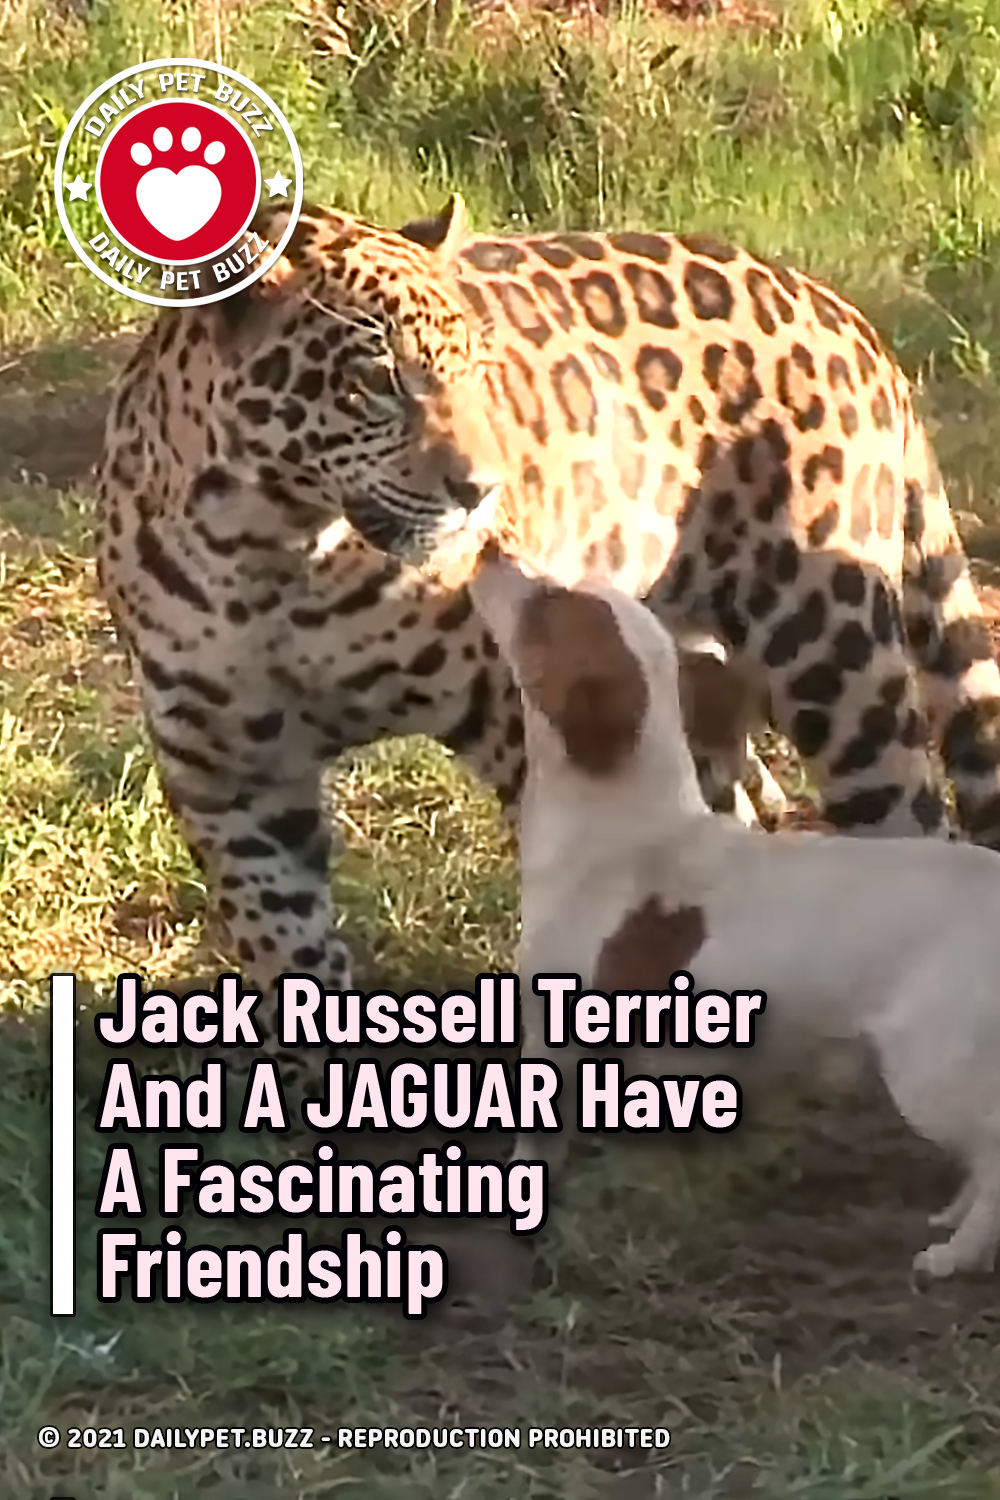 Jack Russell Terrier And A JAGUAR Have A Fascinating Friendship